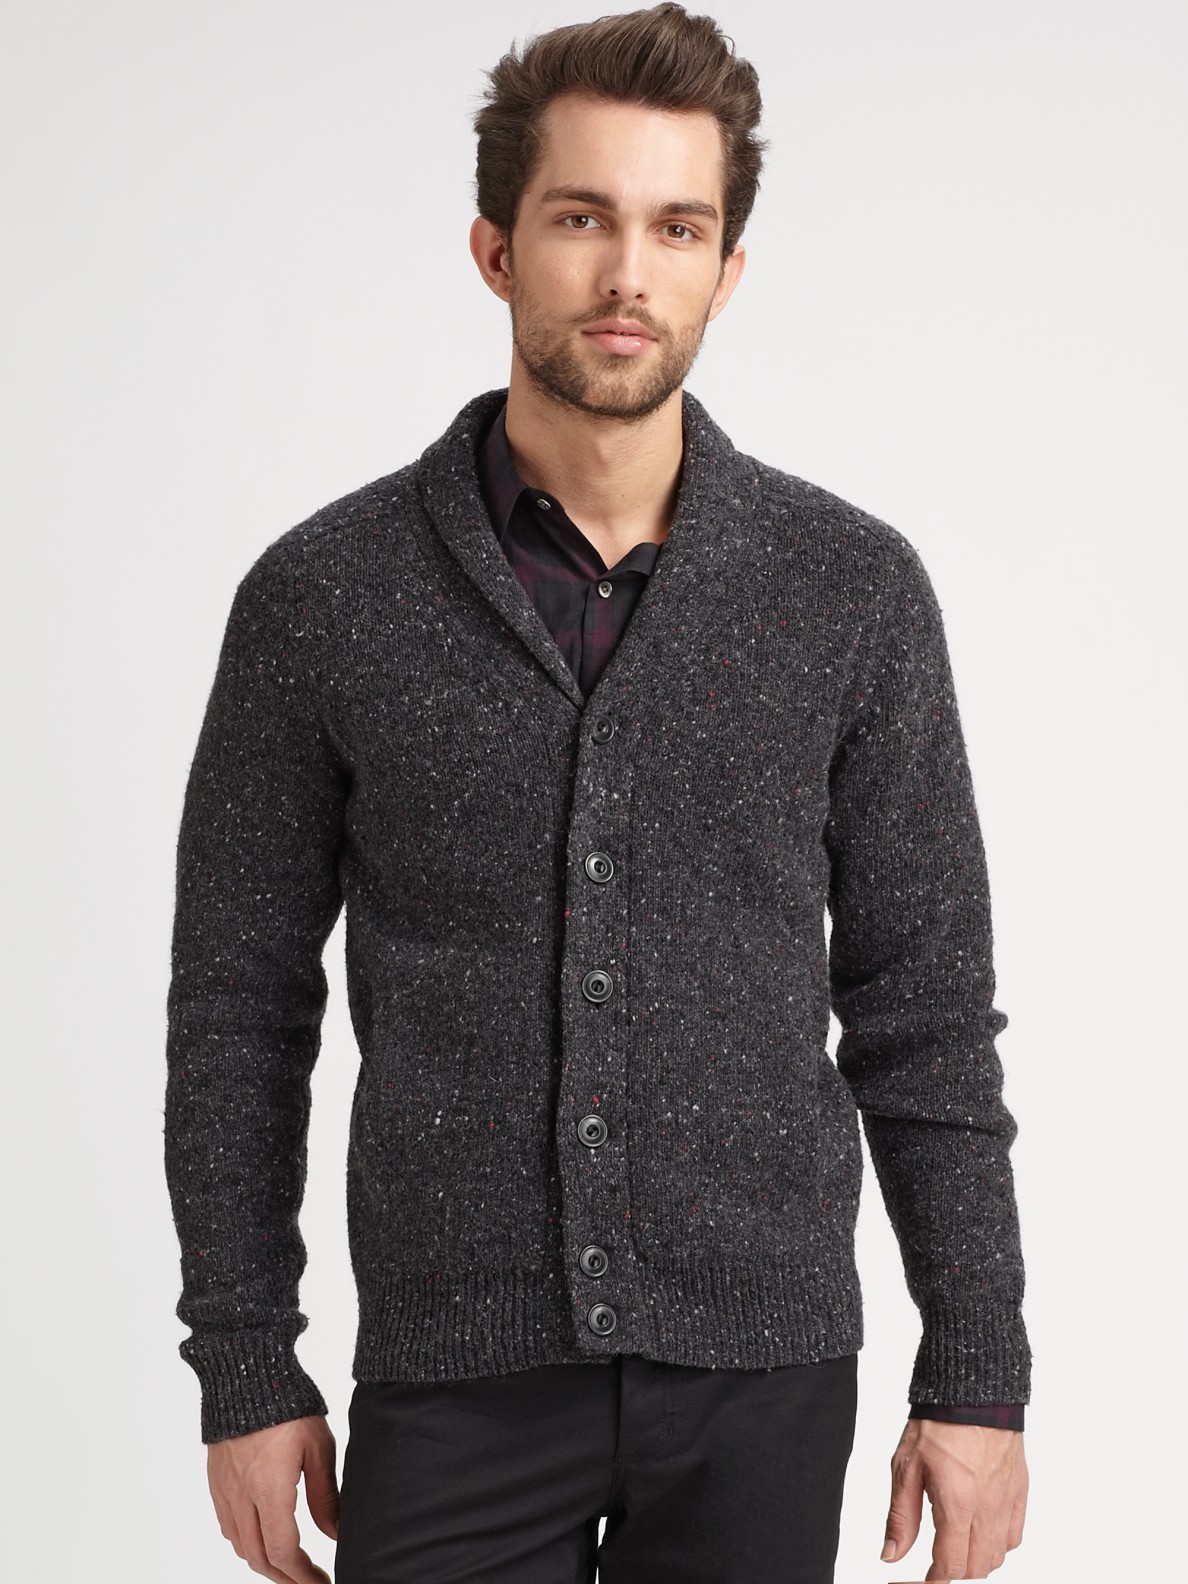 Theory Tweed Cardigan in Charcoal (Gray) for Men - Lyst